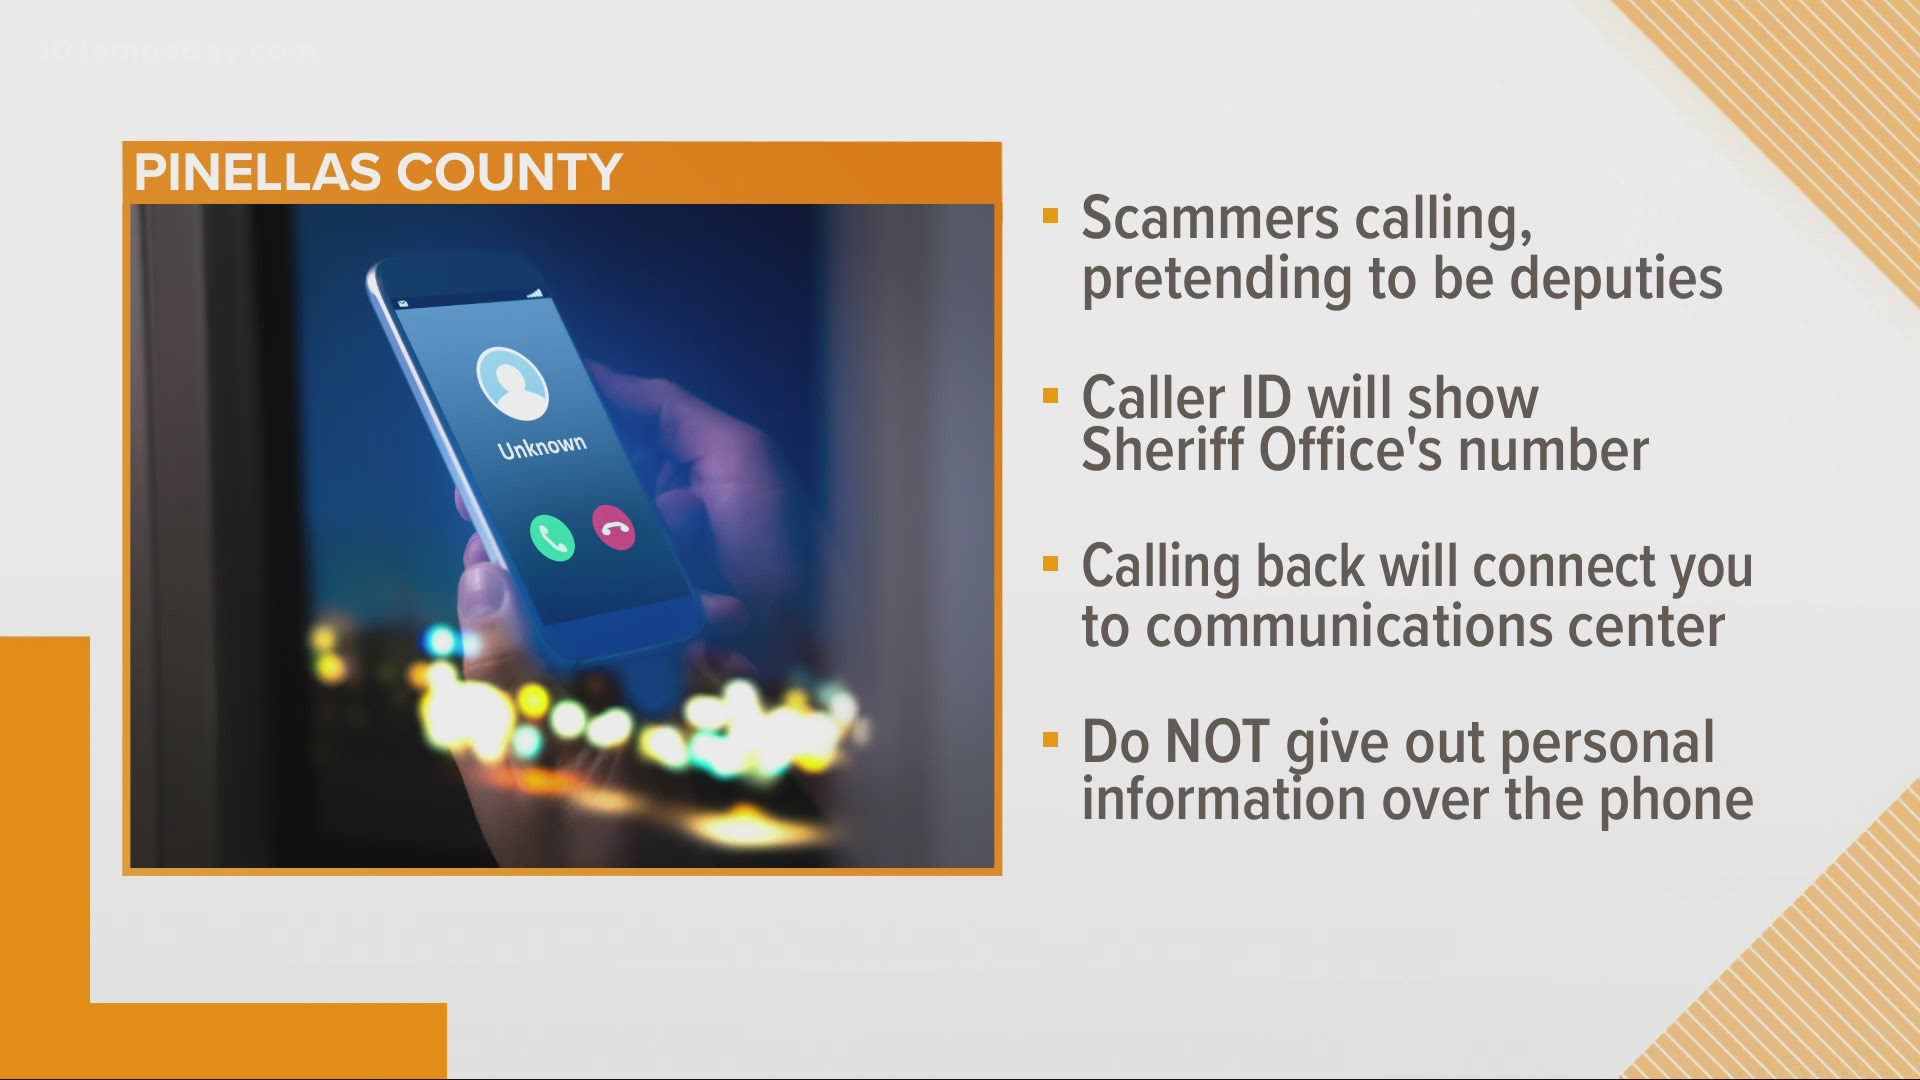 Don't give out personal information over the phone.